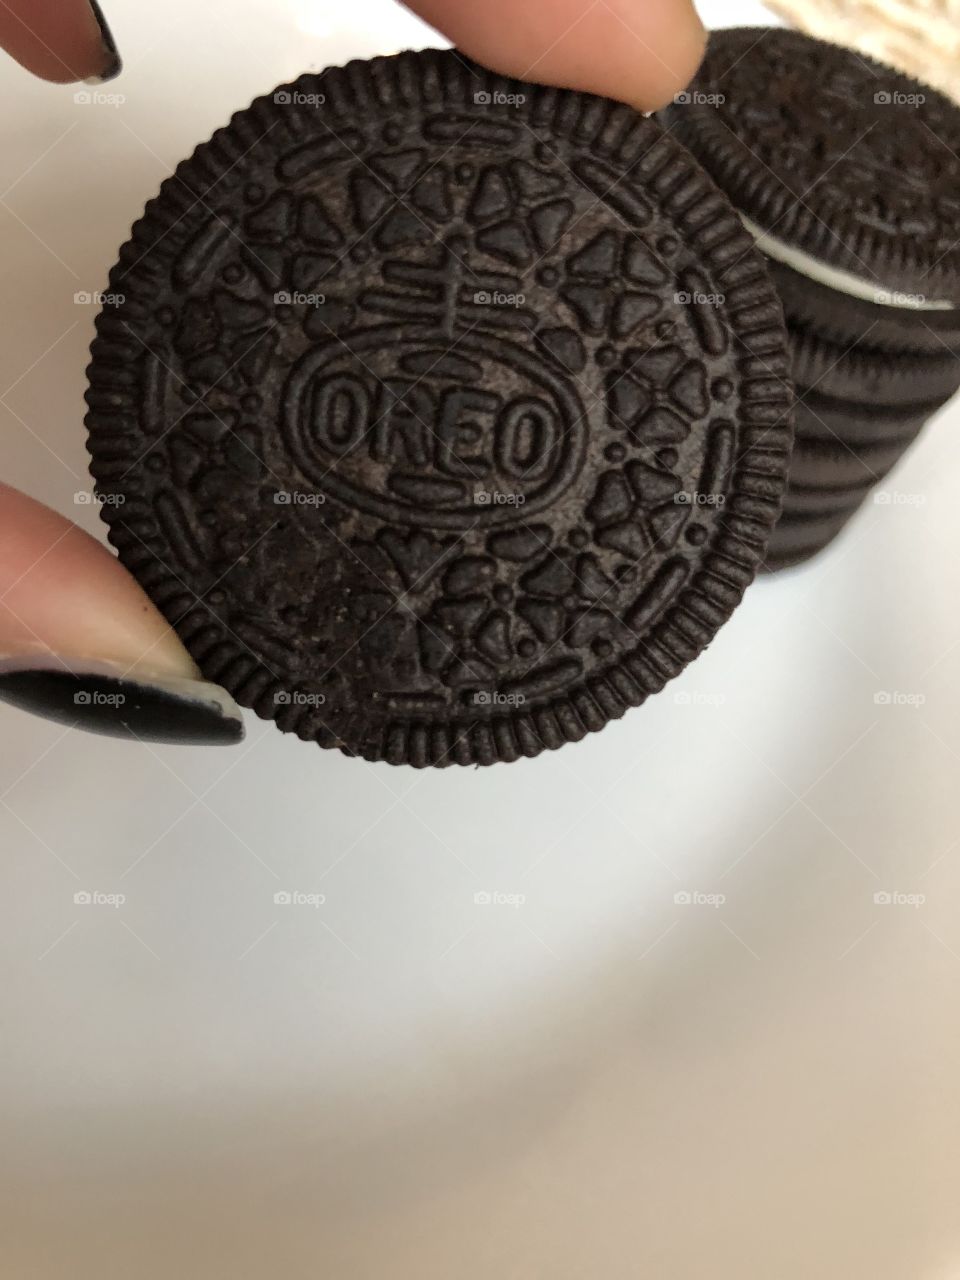 Oreo is the best